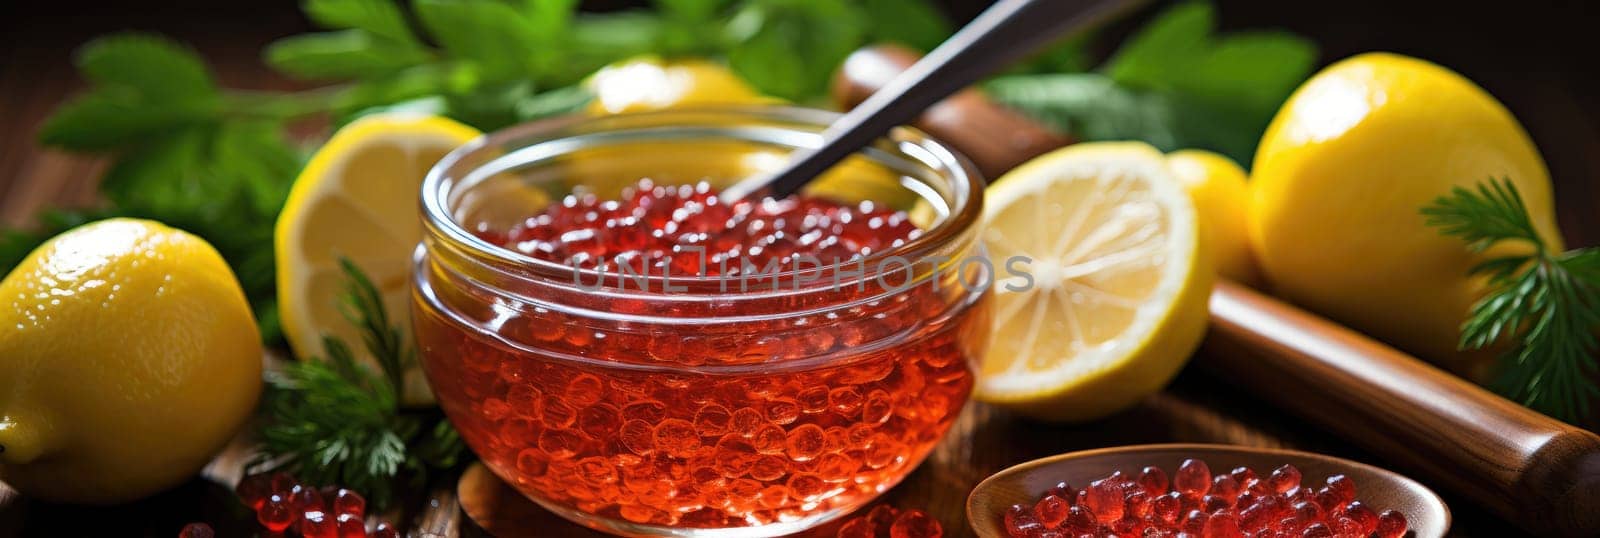 Banner with red caviar and lemon by Yurich32